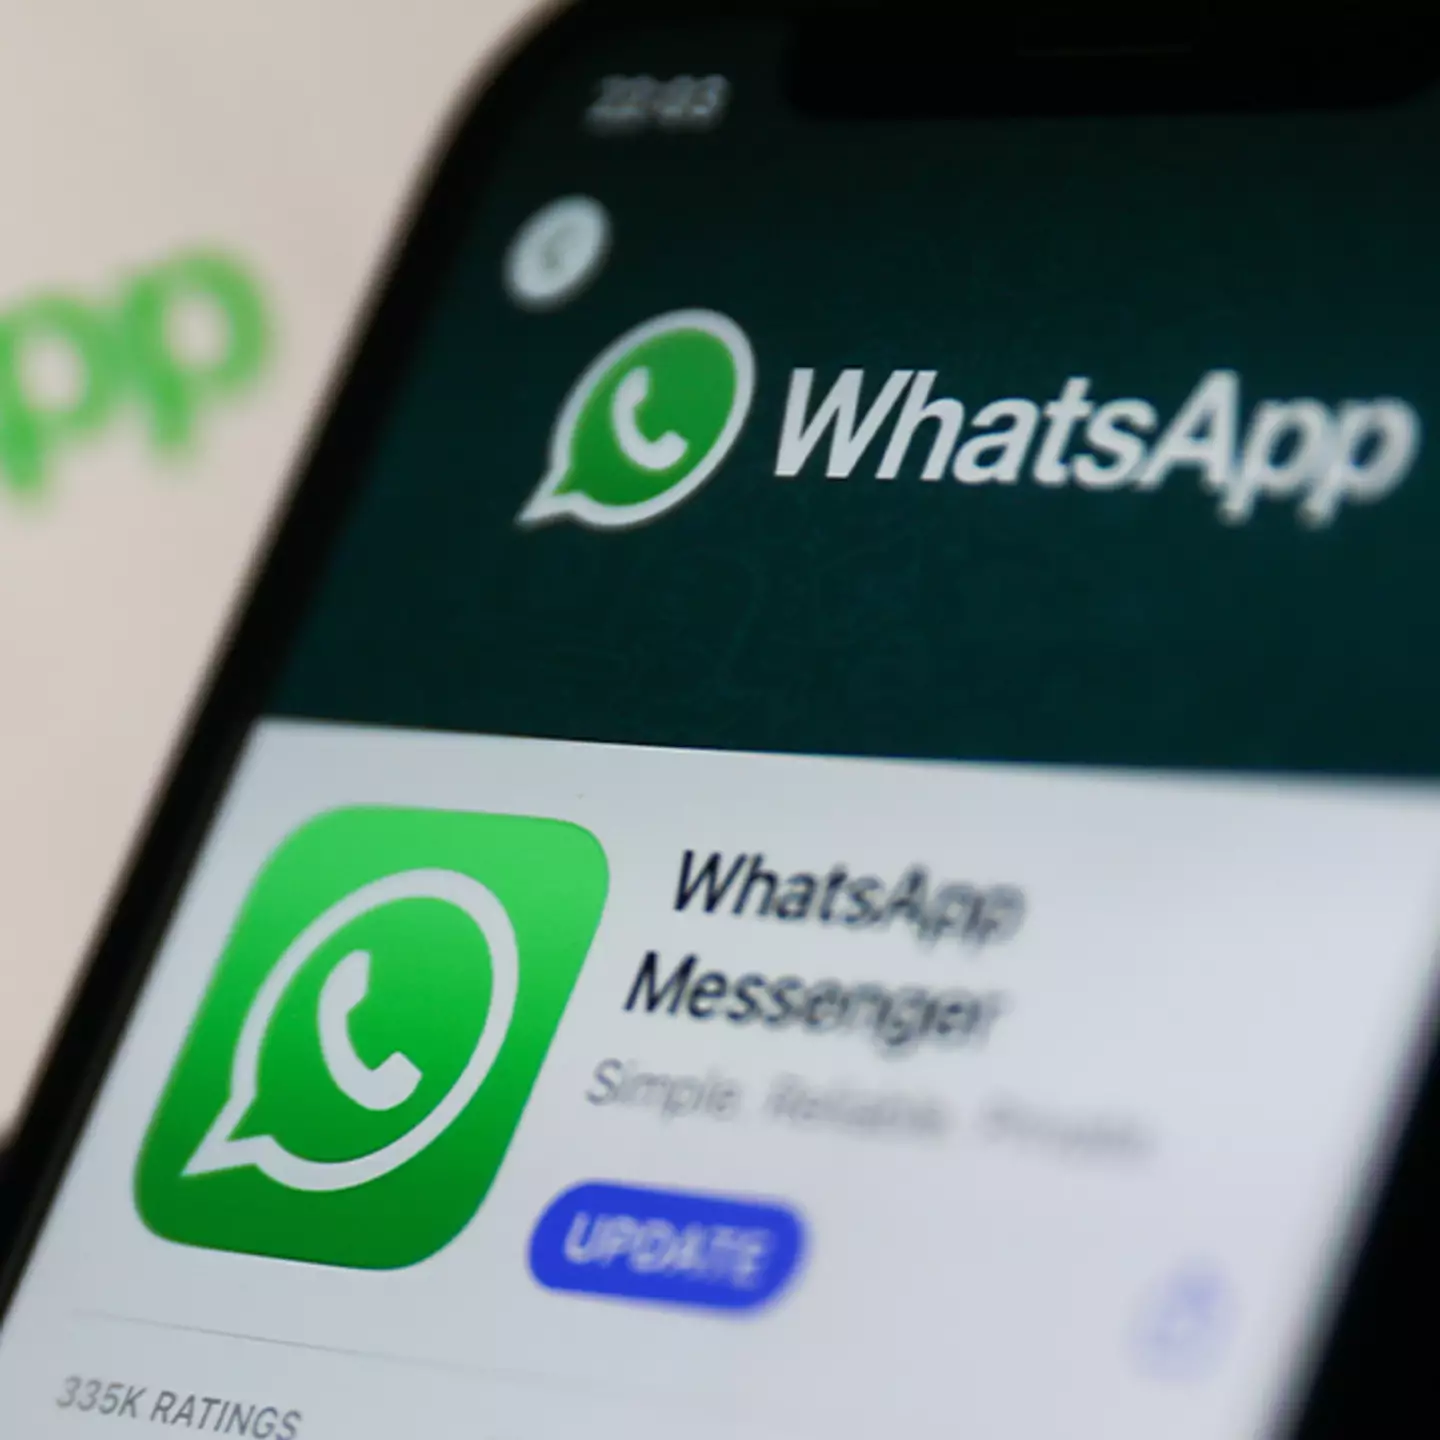 WhatsApp finally issues update that stops it ruining your photos